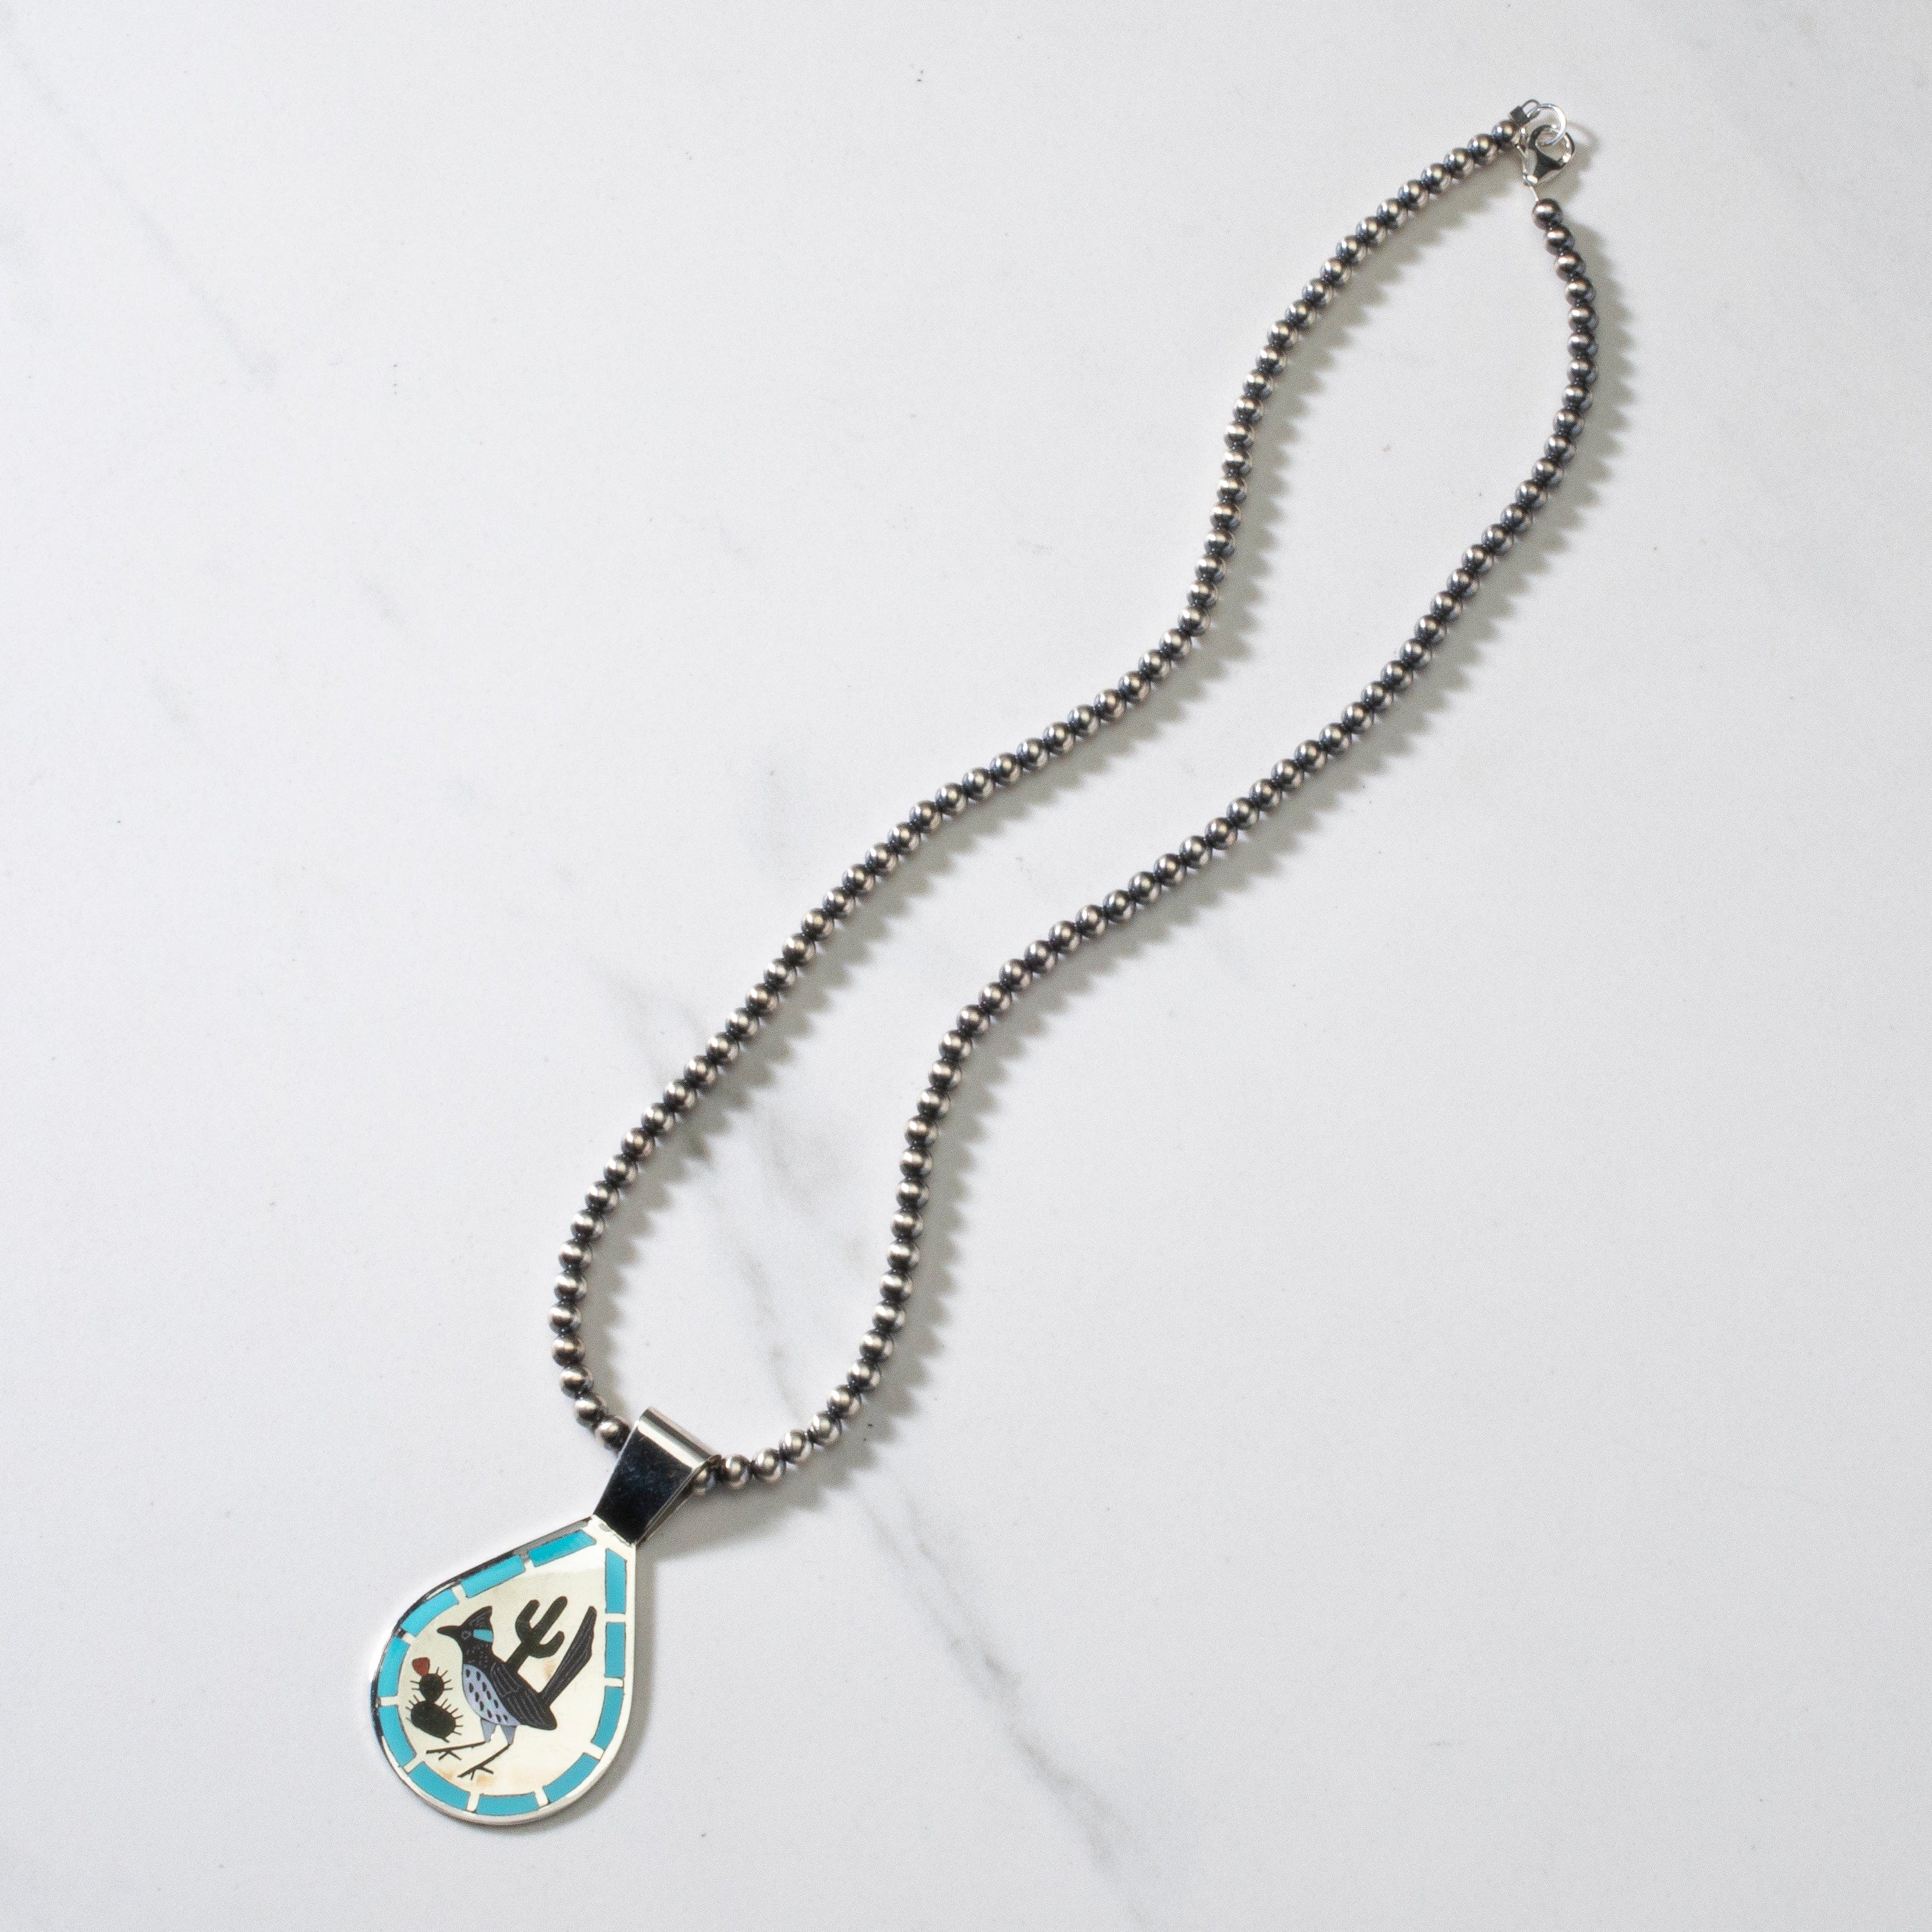 Kalifano Native American Jewelry 18" Dennis & Nancy Edaakie Mutli Gem Road Runner Zuni Inlay Pendant with 4mm Navajo Pearl Necklace USA Native American Made 925 Sterling Silver NAN1500.012